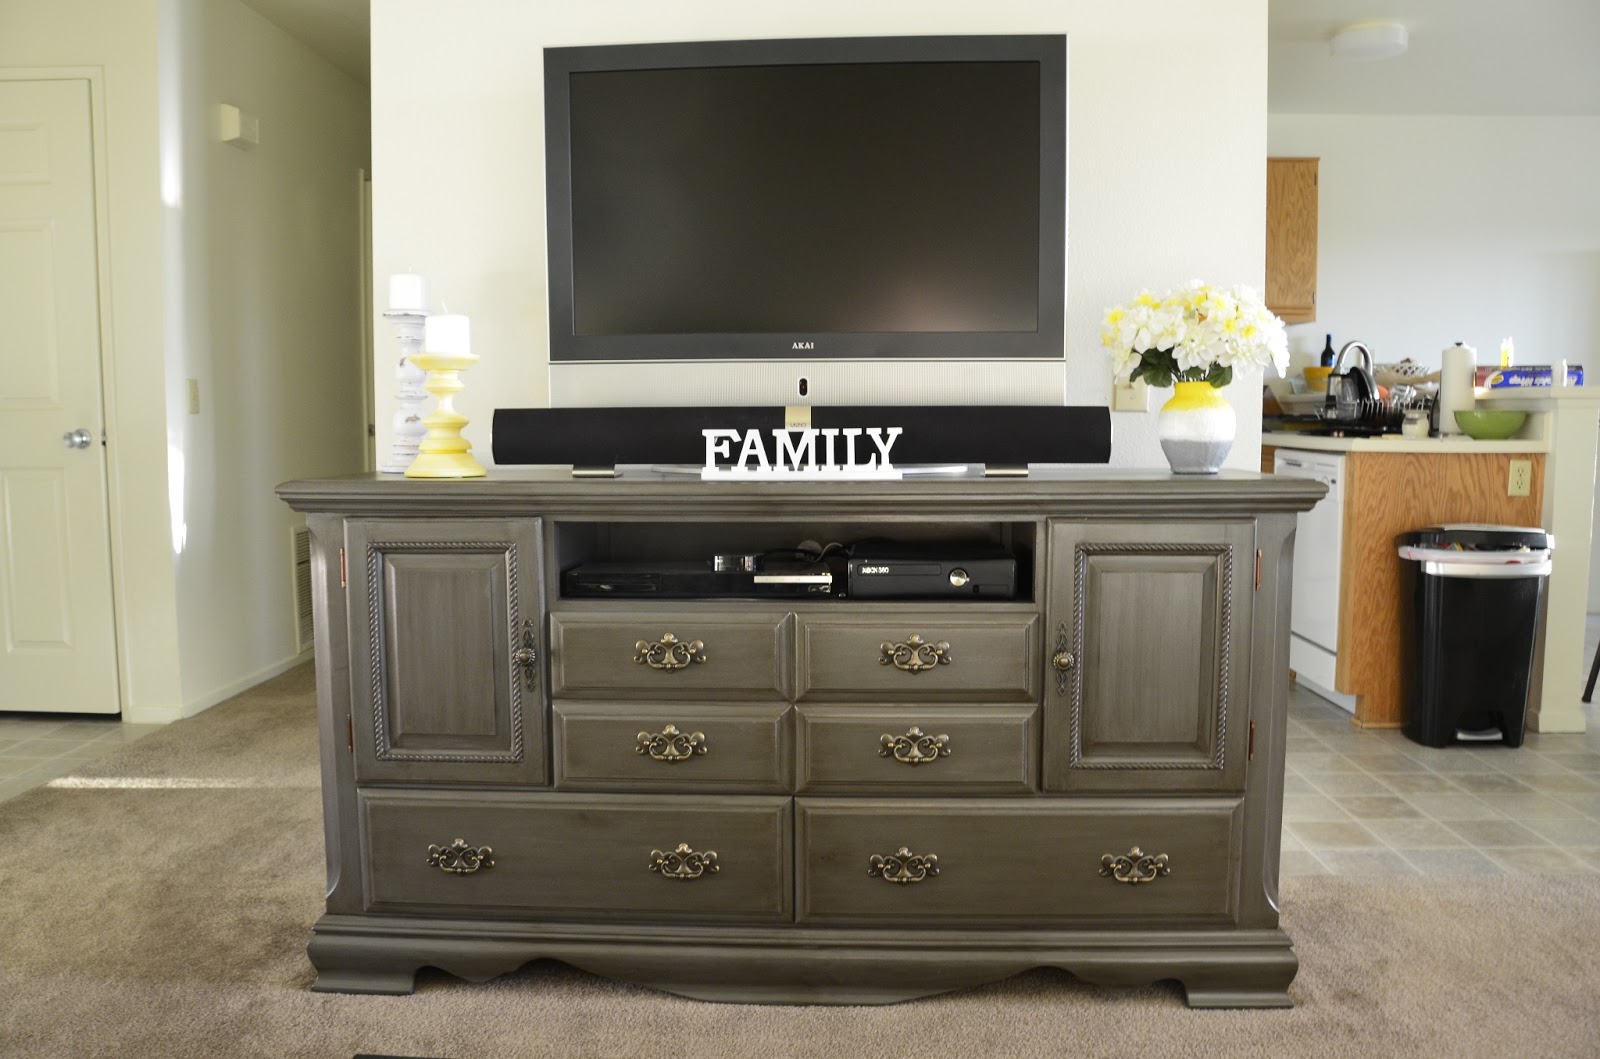 And I created this beautiful grey antique-style tv cabinet.